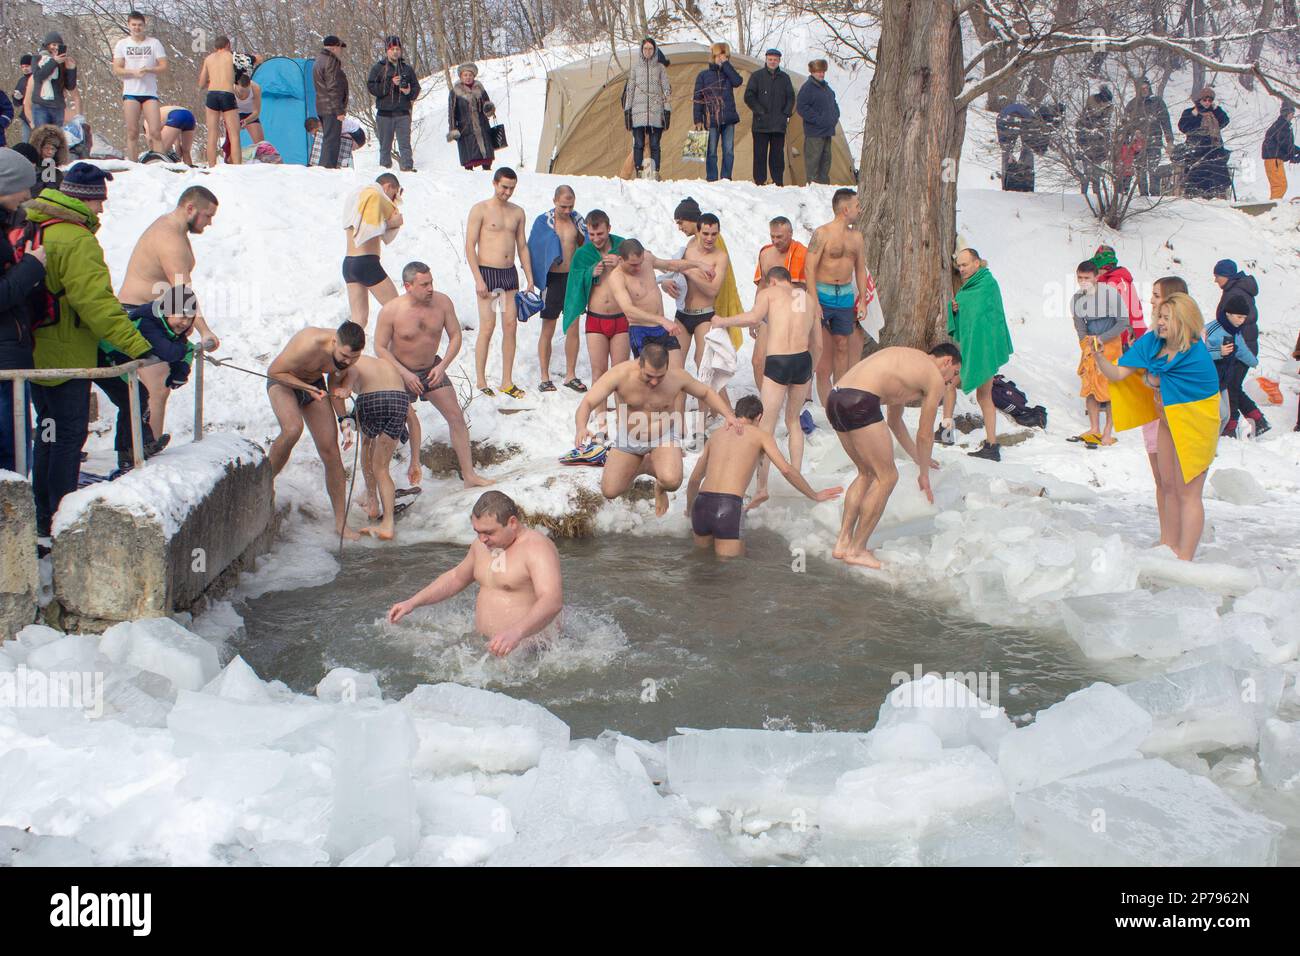 19.01.2017 Ukraine Lviv,many people bathe in winter and get baptized in cold water Stock Photo